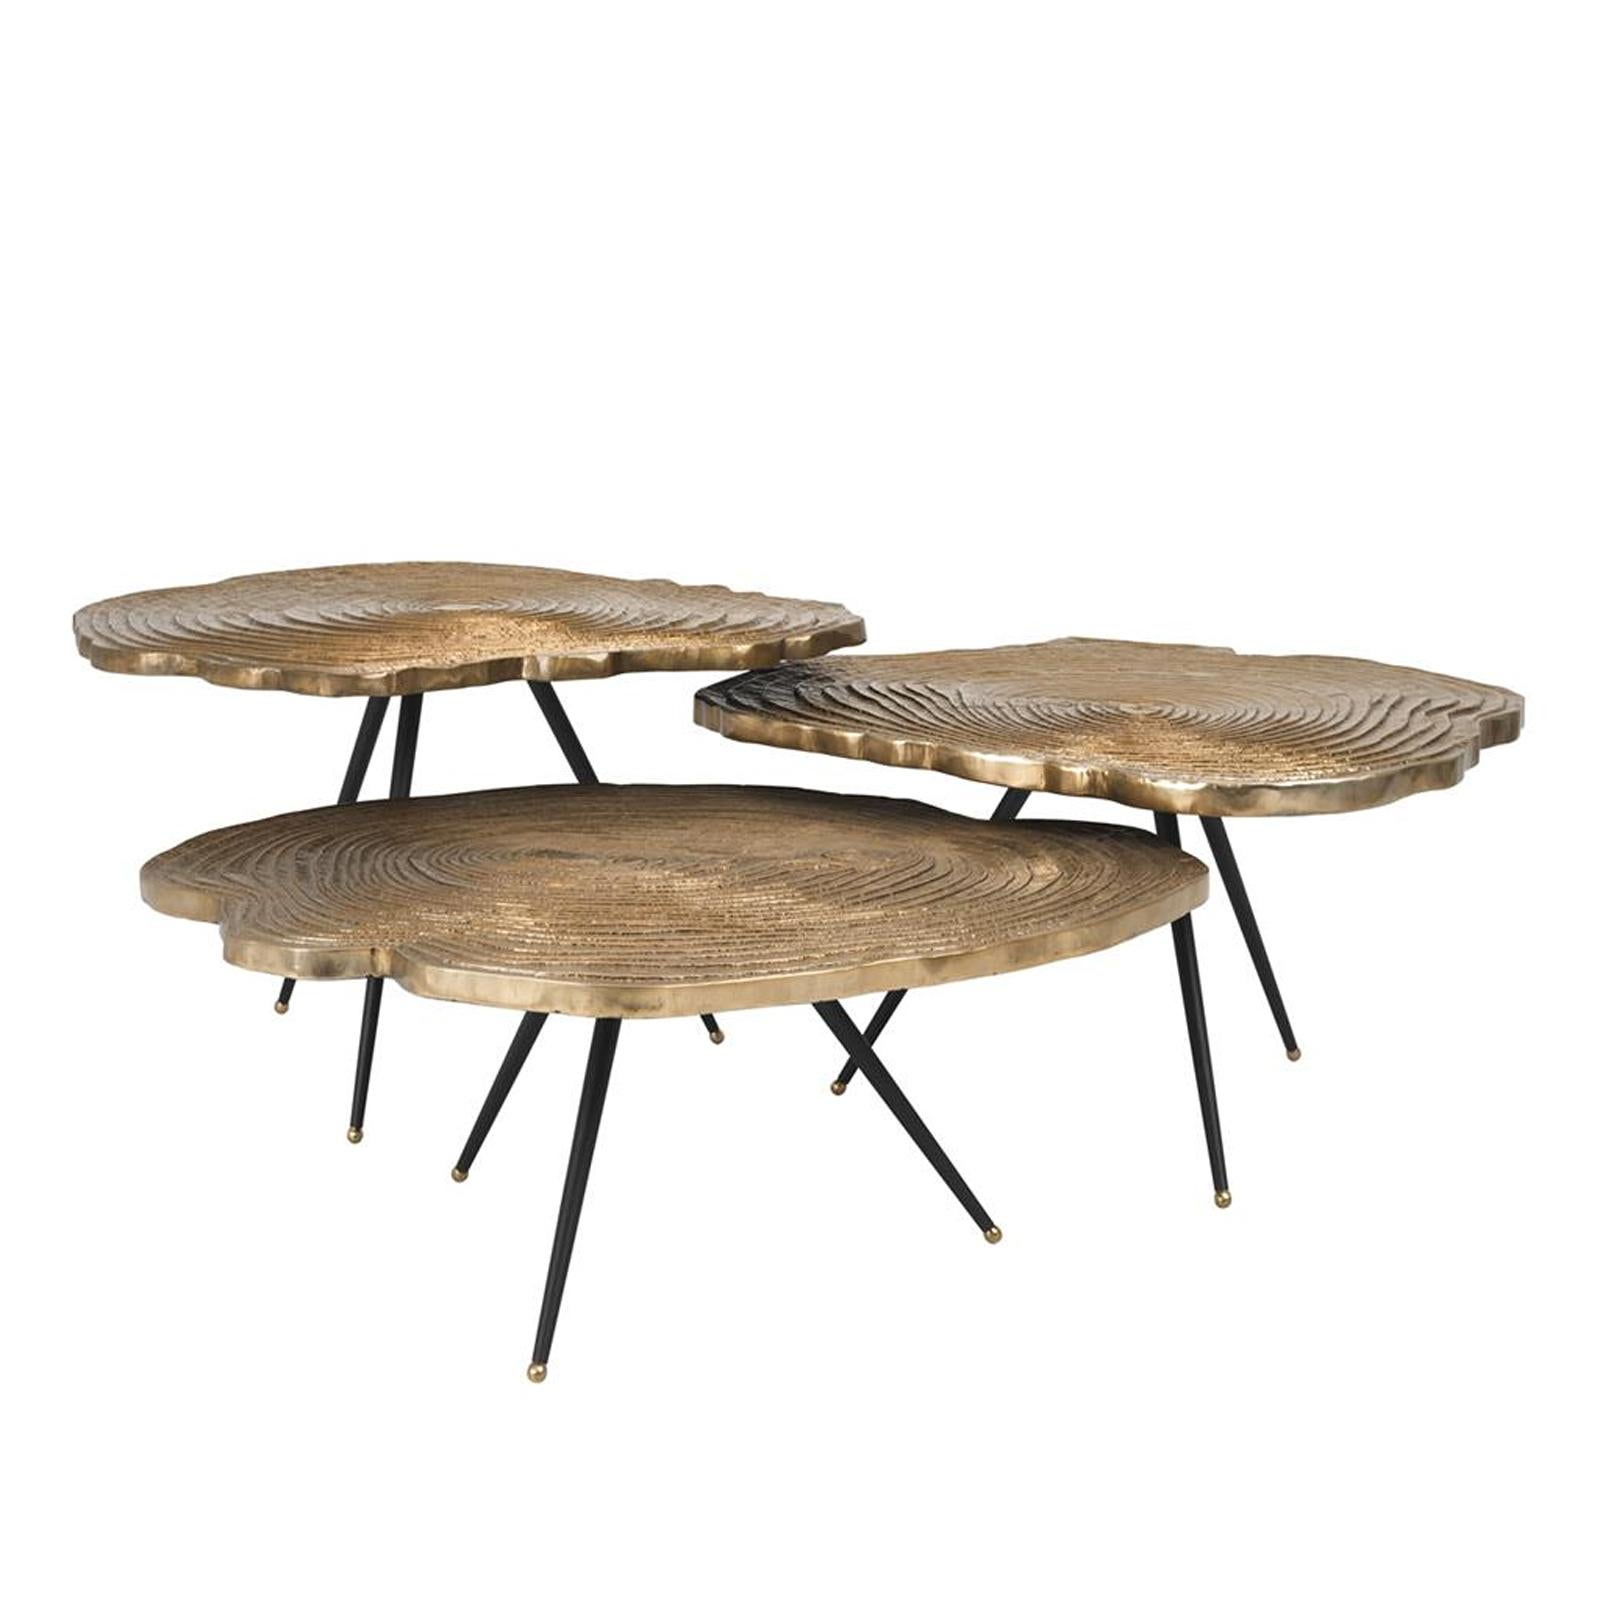 Coffee table veining set of 3 in solid brass
in finish tops. With black finish legs.
Measures:
A/ Ø 67 x H 40cm.
B/ Ø 67 x H 35cm.
C/ Ø 67 x H 29cm.
Set of 3, price: 7350,00€.